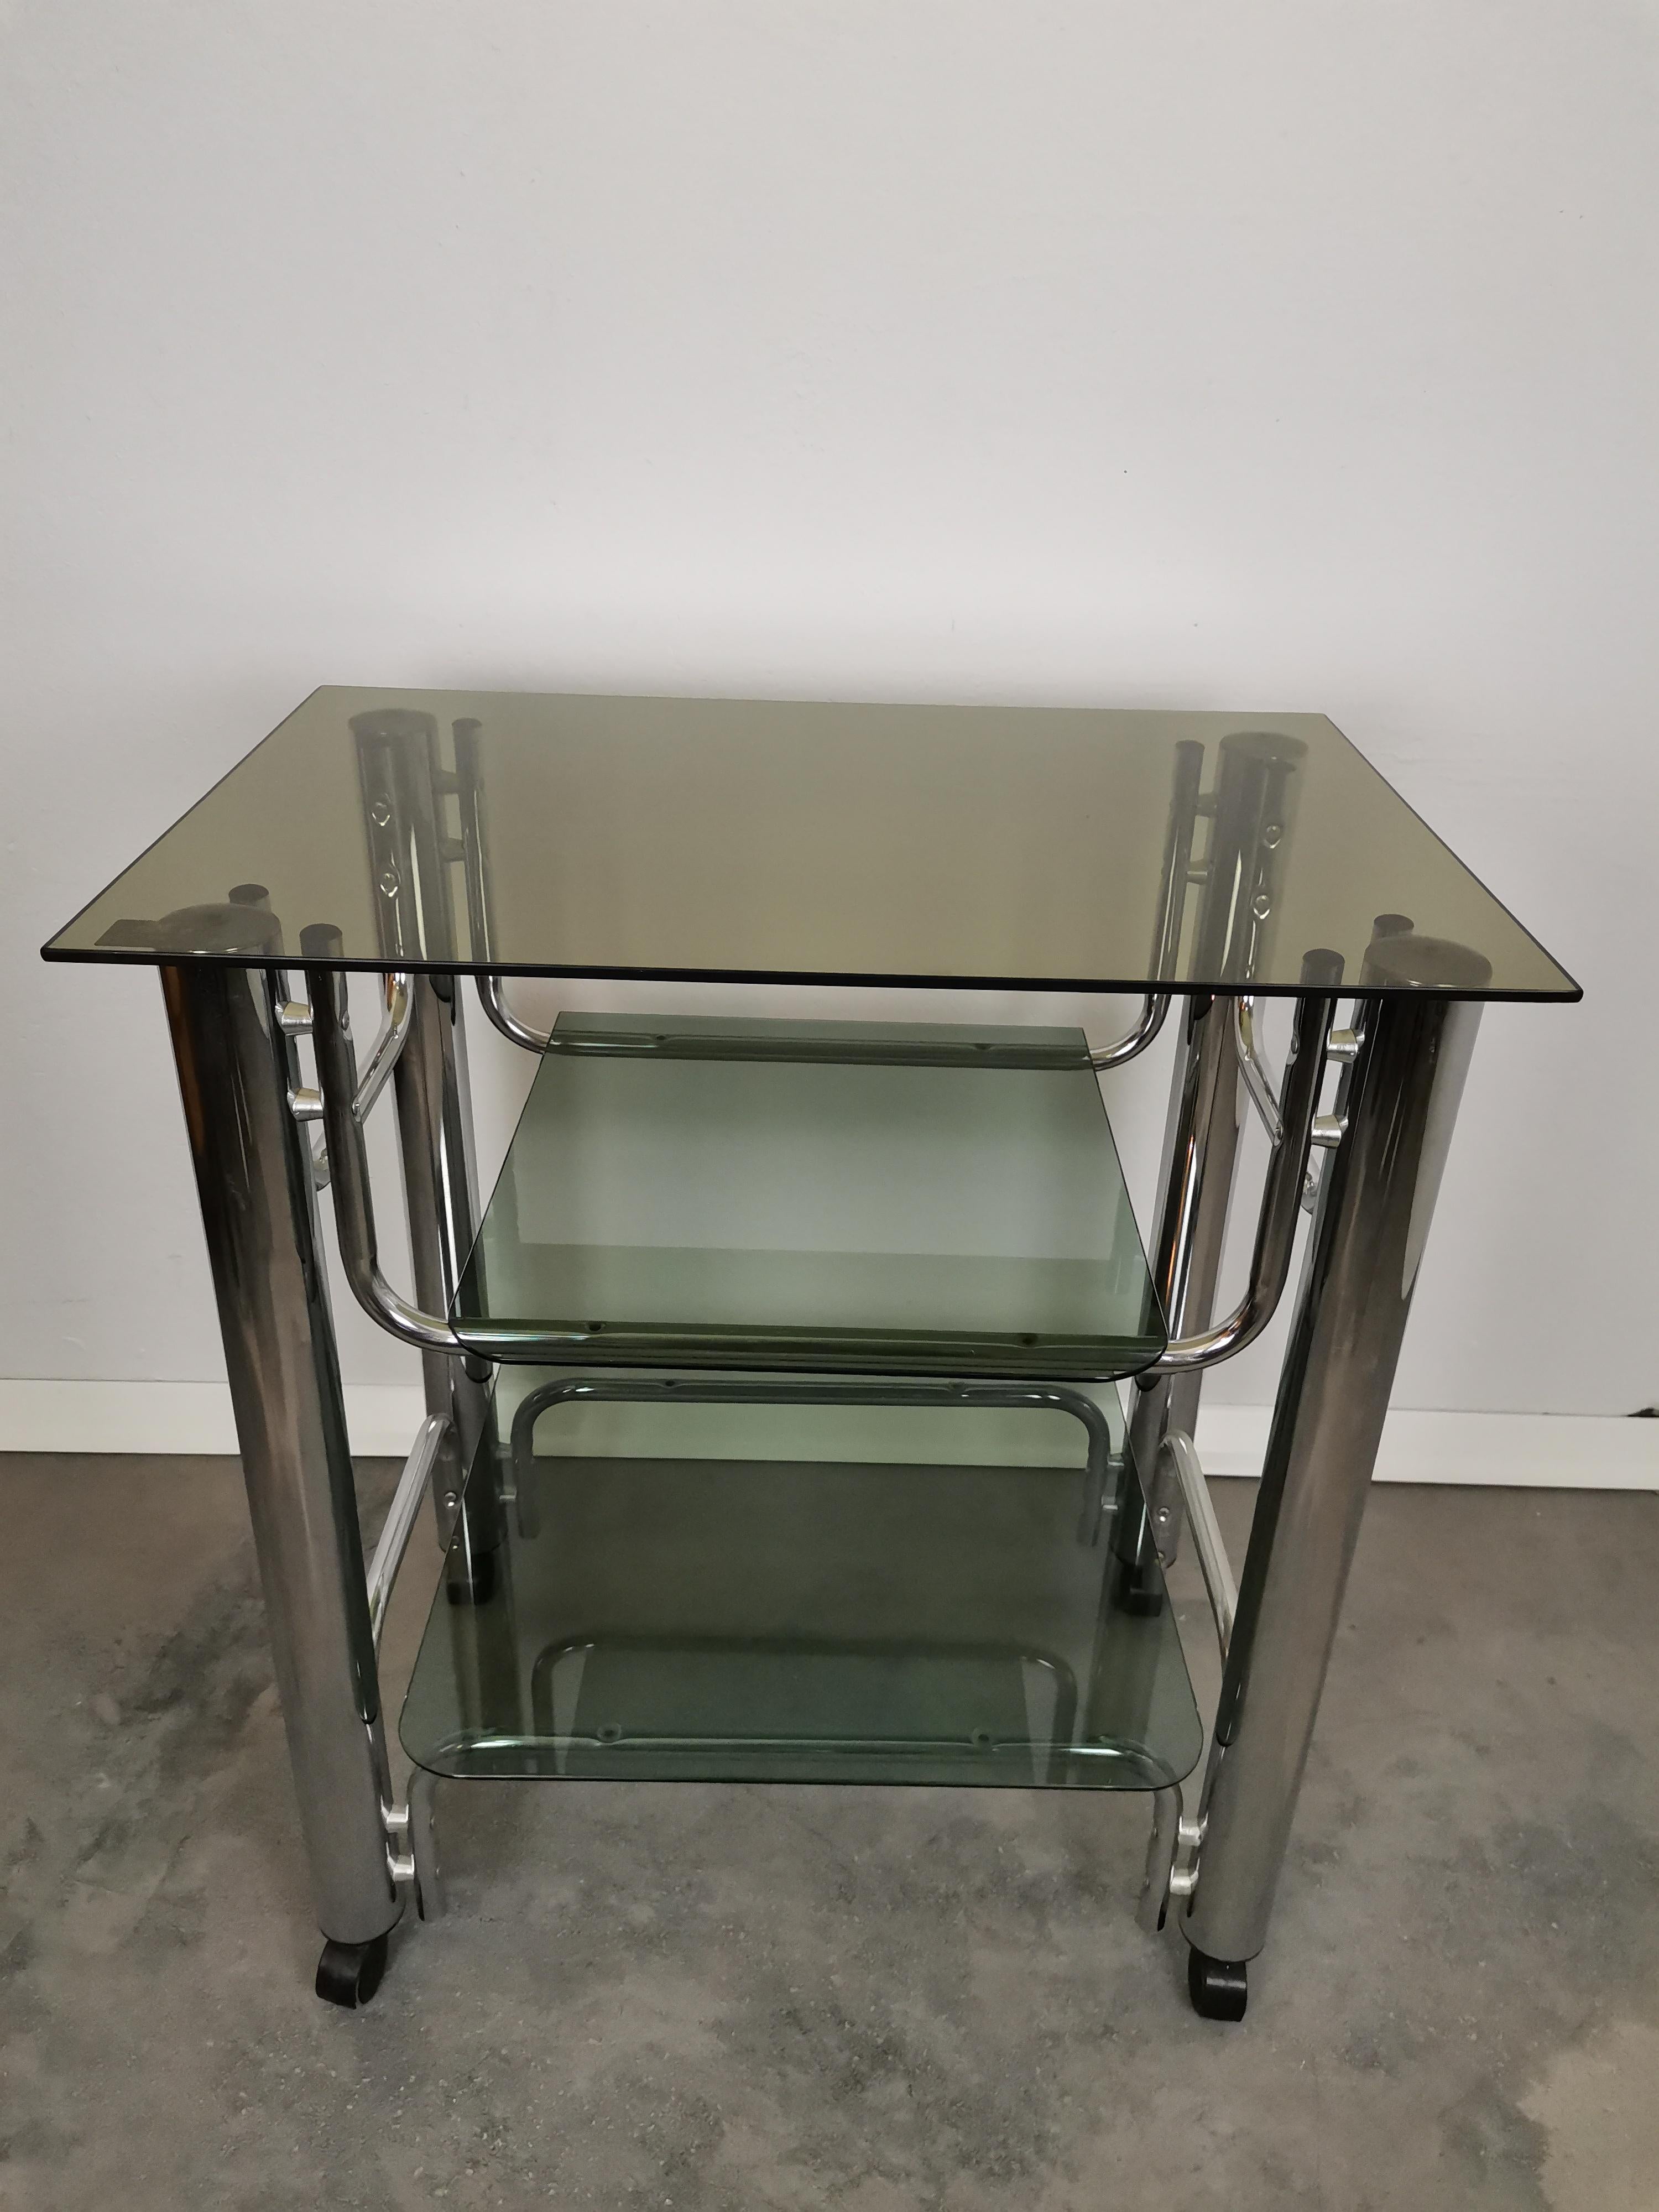 Bar cart / serving cart
Period: 1980s
Cuntry of manufacturer: Italy
Style: midcentury modern
Materials: chromed tubular steel, glass, plastic parts

Condition: very good vintage condition.